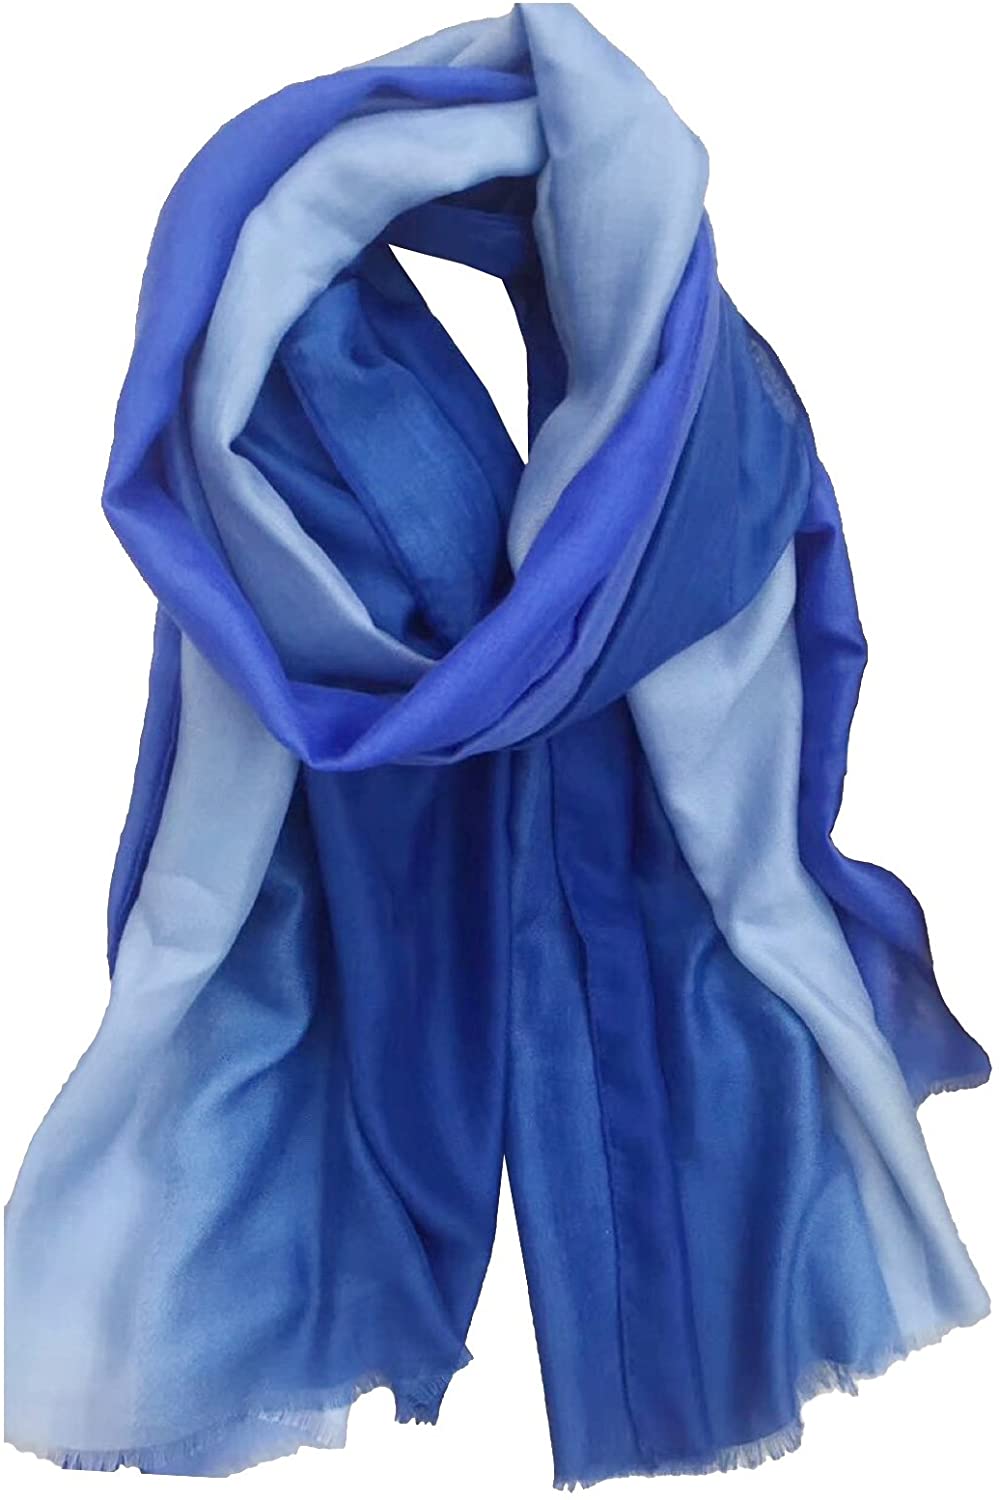 World of Shawls New Autumn/Winter Collection Ombre Silky Scarf/Shawl/Wraps Occasion Wedding Party Casual - World of Scarfs